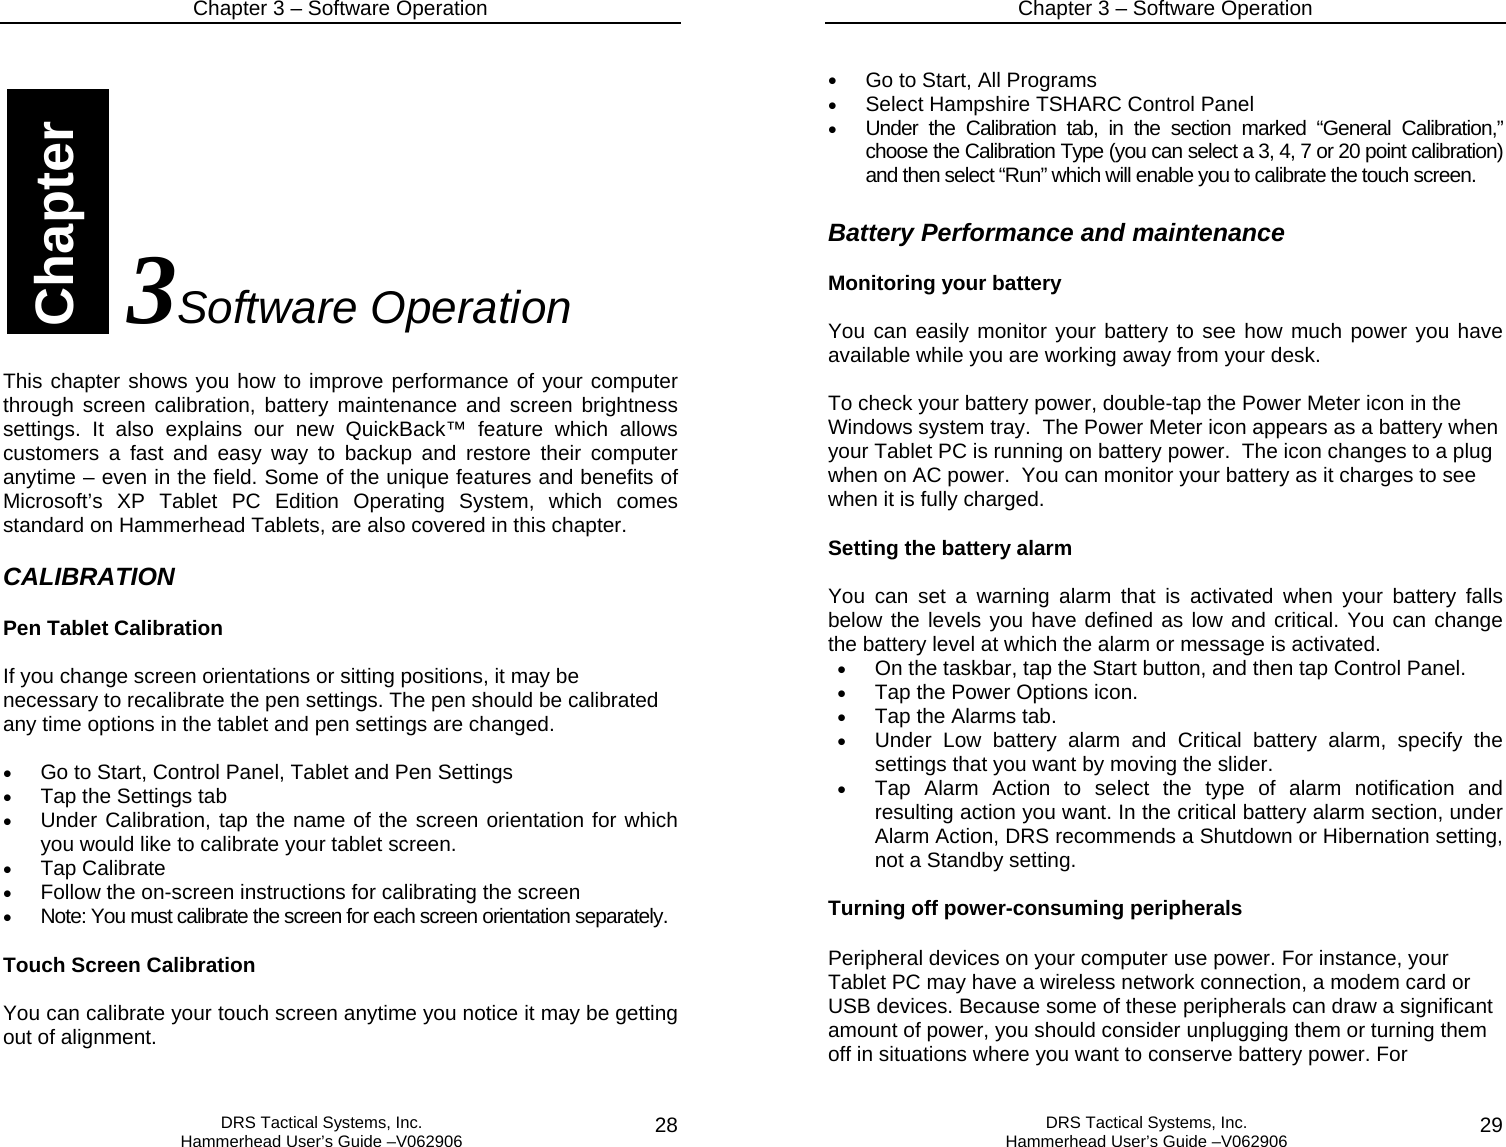 Chapter 3 – Software Operation   DRS Tactical Systems, Inc.  Hammerhead User’s Guide –V062906  28             3Software Operation  This chapter shows you how to improve performance of your computer through screen calibration, battery maintenance and screen brightness settings. It also explains our new QuickBack™ feature which allows customers a fast and easy way to backup and restore their computer anytime – even in the field. Some of the unique features and benefits of Microsoft’s XP Tablet PC Edition Operating System, which comes standard on Hammerhead Tablets, are also covered in this chapter.  CALIBRATION  Pen Tablet Calibration  If you change screen orientations or sitting positions, it may be necessary to recalibrate the pen settings. The pen should be calibrated any time options in the tablet and pen settings are changed.  • Go to Start, Control Panel, Tablet and Pen Settings  • Tap the Settings tab  • Under Calibration, tap the name of the screen orientation for which you would like to calibrate your tablet screen.  • Tap Calibrate  • Follow the on-screen instructions for calibrating the screen  • Note: You must calibrate the screen for each screen orientation separately.   Touch Screen Calibration  You can calibrate your touch screen anytime you notice it may be getting out of alignment.   Chapter Chapter 3 – Software Operation   DRS Tactical Systems, Inc.  Hammerhead User’s Guide –V062906  29 • Go to Start, All Programs  • Select Hampshire TSHARC Control Panel • Under the Calibration tab, in the section marked “General Calibration,” choose the Calibration Type (you can select a 3, 4, 7 or 20 point calibration) and then select “Run” which will enable you to calibrate the touch screen.   Battery Performance and maintenance  Monitoring your battery  You can easily monitor your battery to see how much power you have available while you are working away from your desk.  To check your battery power, double-tap the Power Meter icon in the Windows system tray.  The Power Meter icon appears as a battery when your Tablet PC is running on battery power.  The icon changes to a plug when on AC power.  You can monitor your battery as it charges to see when it is fully charged.  Setting the battery alarm  You can set a warning alarm that is activated when your battery falls below the levels you have defined as low and critical. You can change the battery level at which the alarm or message is activated. • On the taskbar, tap the Start button, and then tap Control Panel.  • Tap the Power Options icon.  • Tap the Alarms tab.  • Under Low battery alarm and Critical battery alarm, specify the settings that you want by moving the slider.  • Tap Alarm Action to select the type of alarm notification and resulting action you want. In the critical battery alarm section, under Alarm Action, DRS recommends a Shutdown or Hibernation setting, not a Standby setting.    Turning off power-consuming peripherals  Peripheral devices on your computer use power. For instance, your Tablet PC may have a wireless network connection, a modem card or USB devices. Because some of these peripherals can draw a significant amount of power, you should consider unplugging them or turning them off in situations where you want to conserve battery power. For 